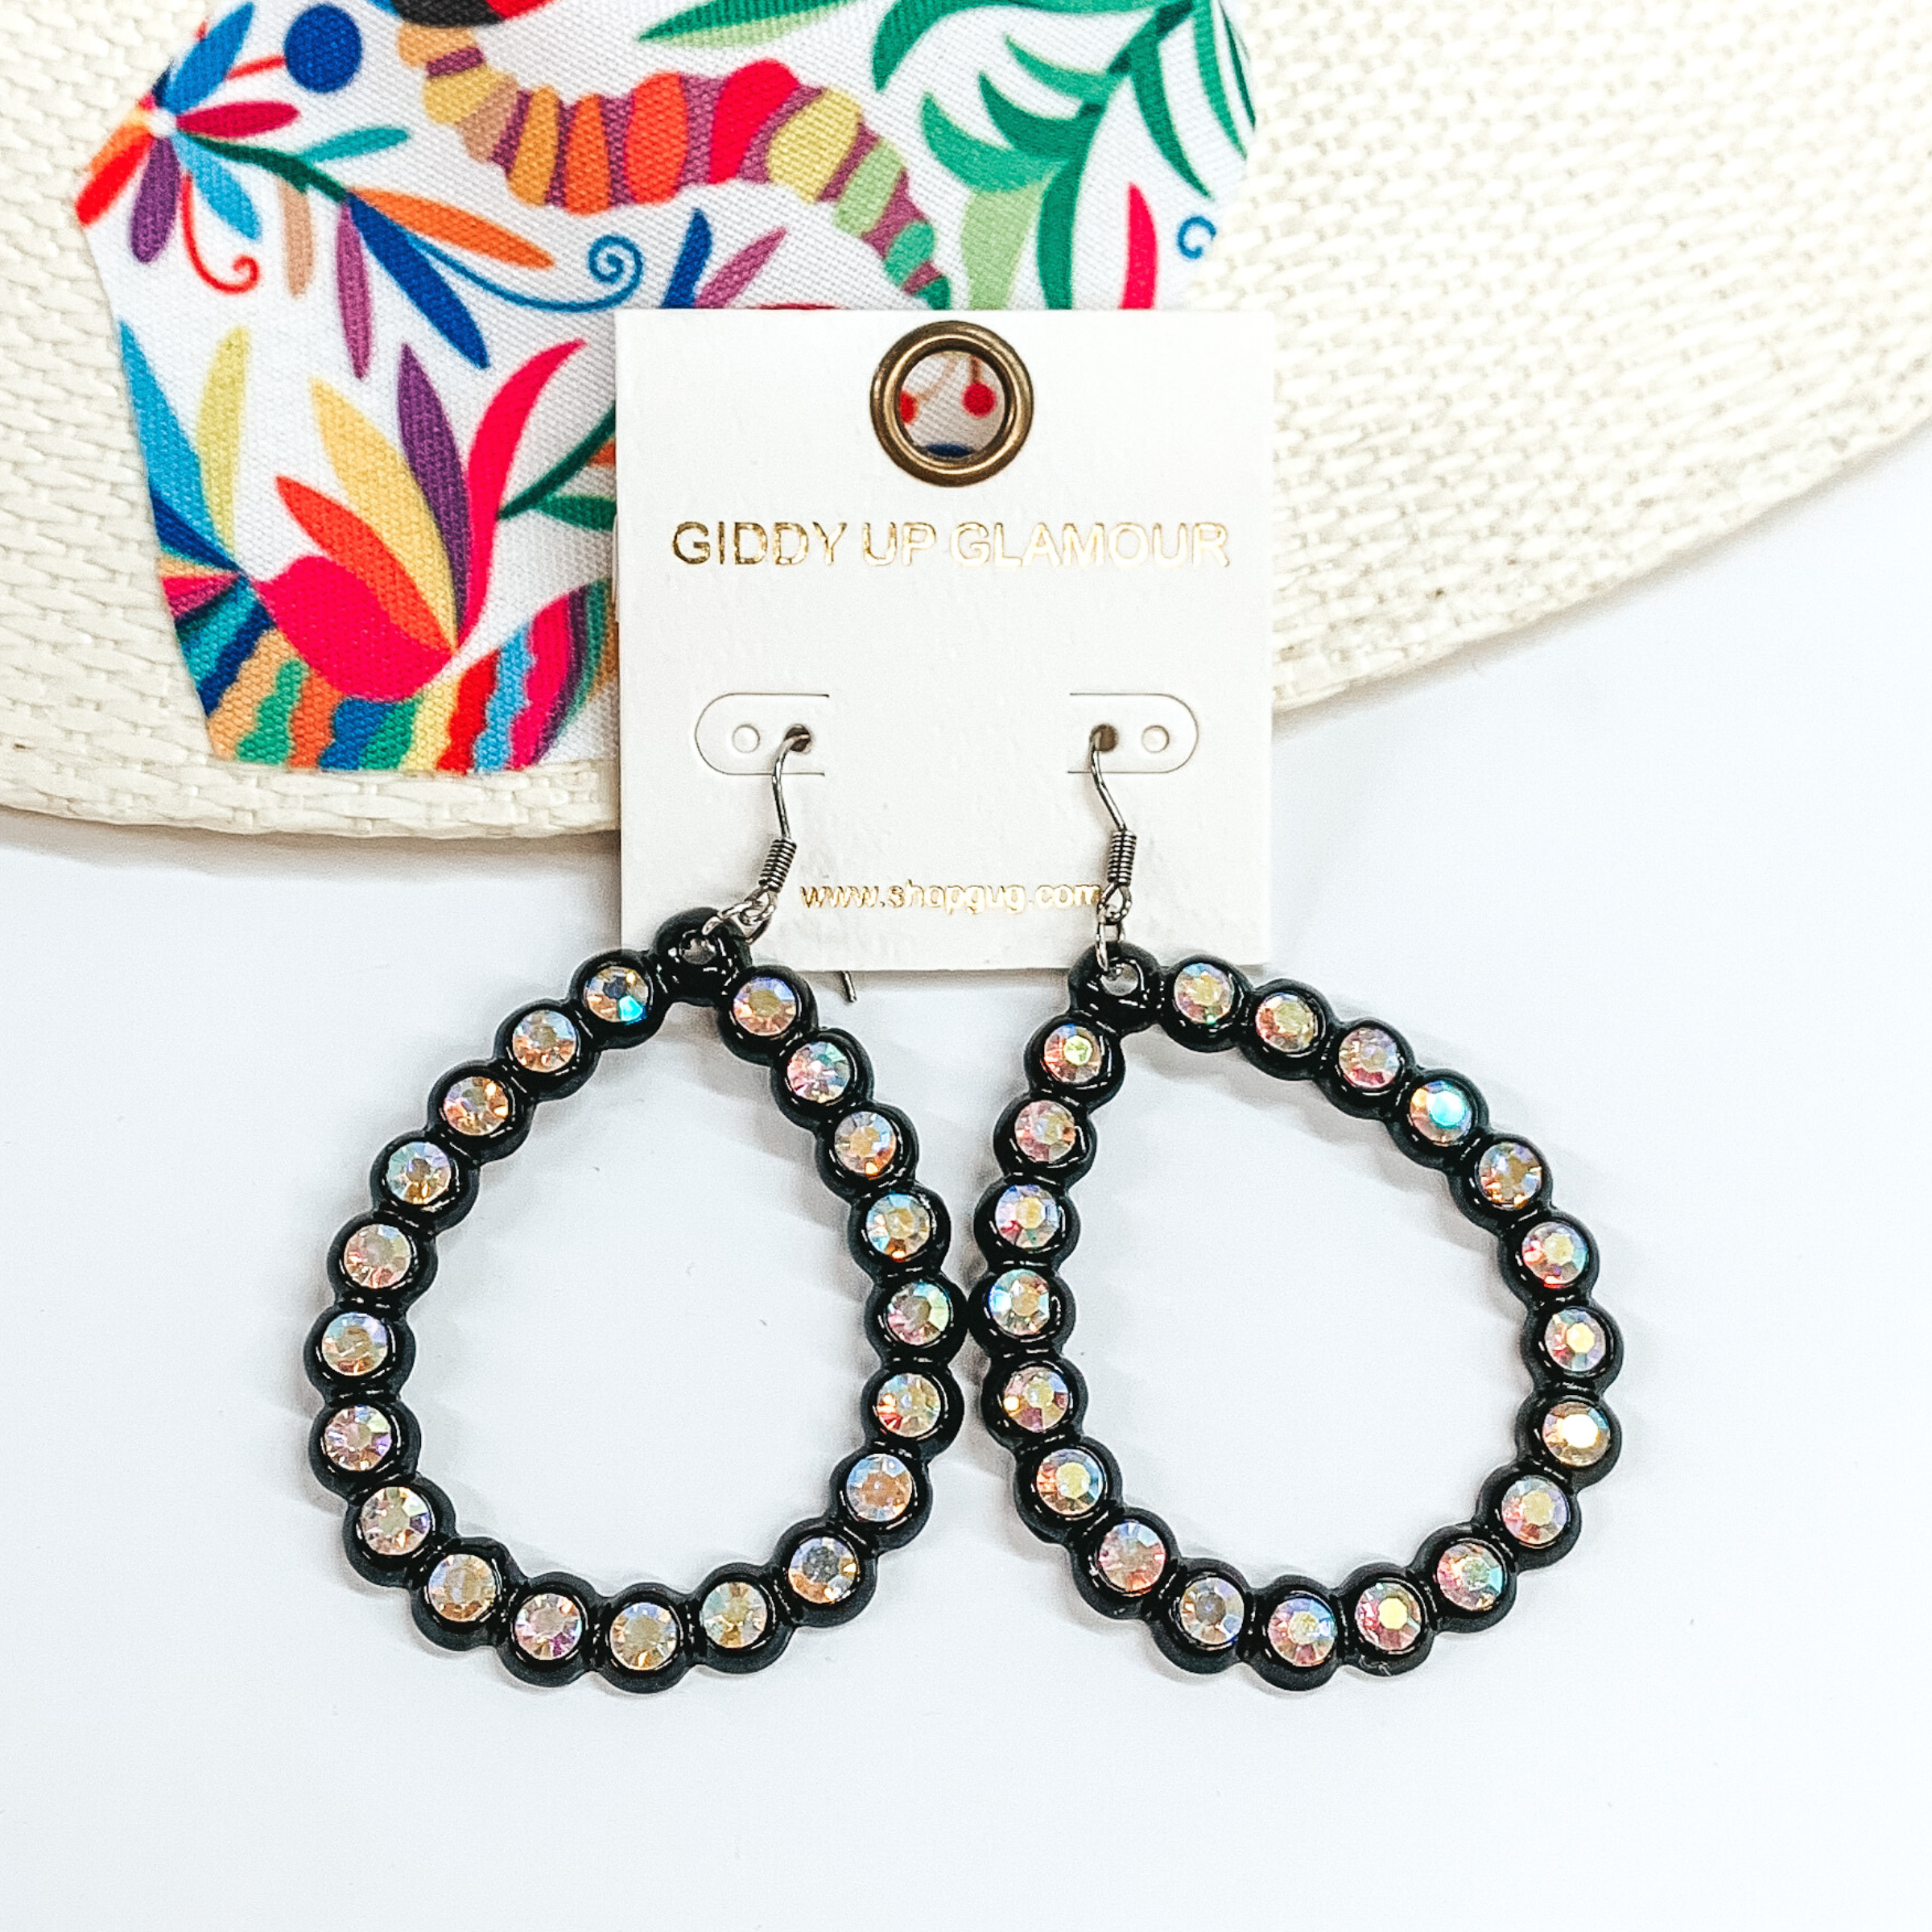 Black, open teardrop earrings with ab crystal outline. These earrings are pictured on a white background with a colorful piece of fabric behind them.